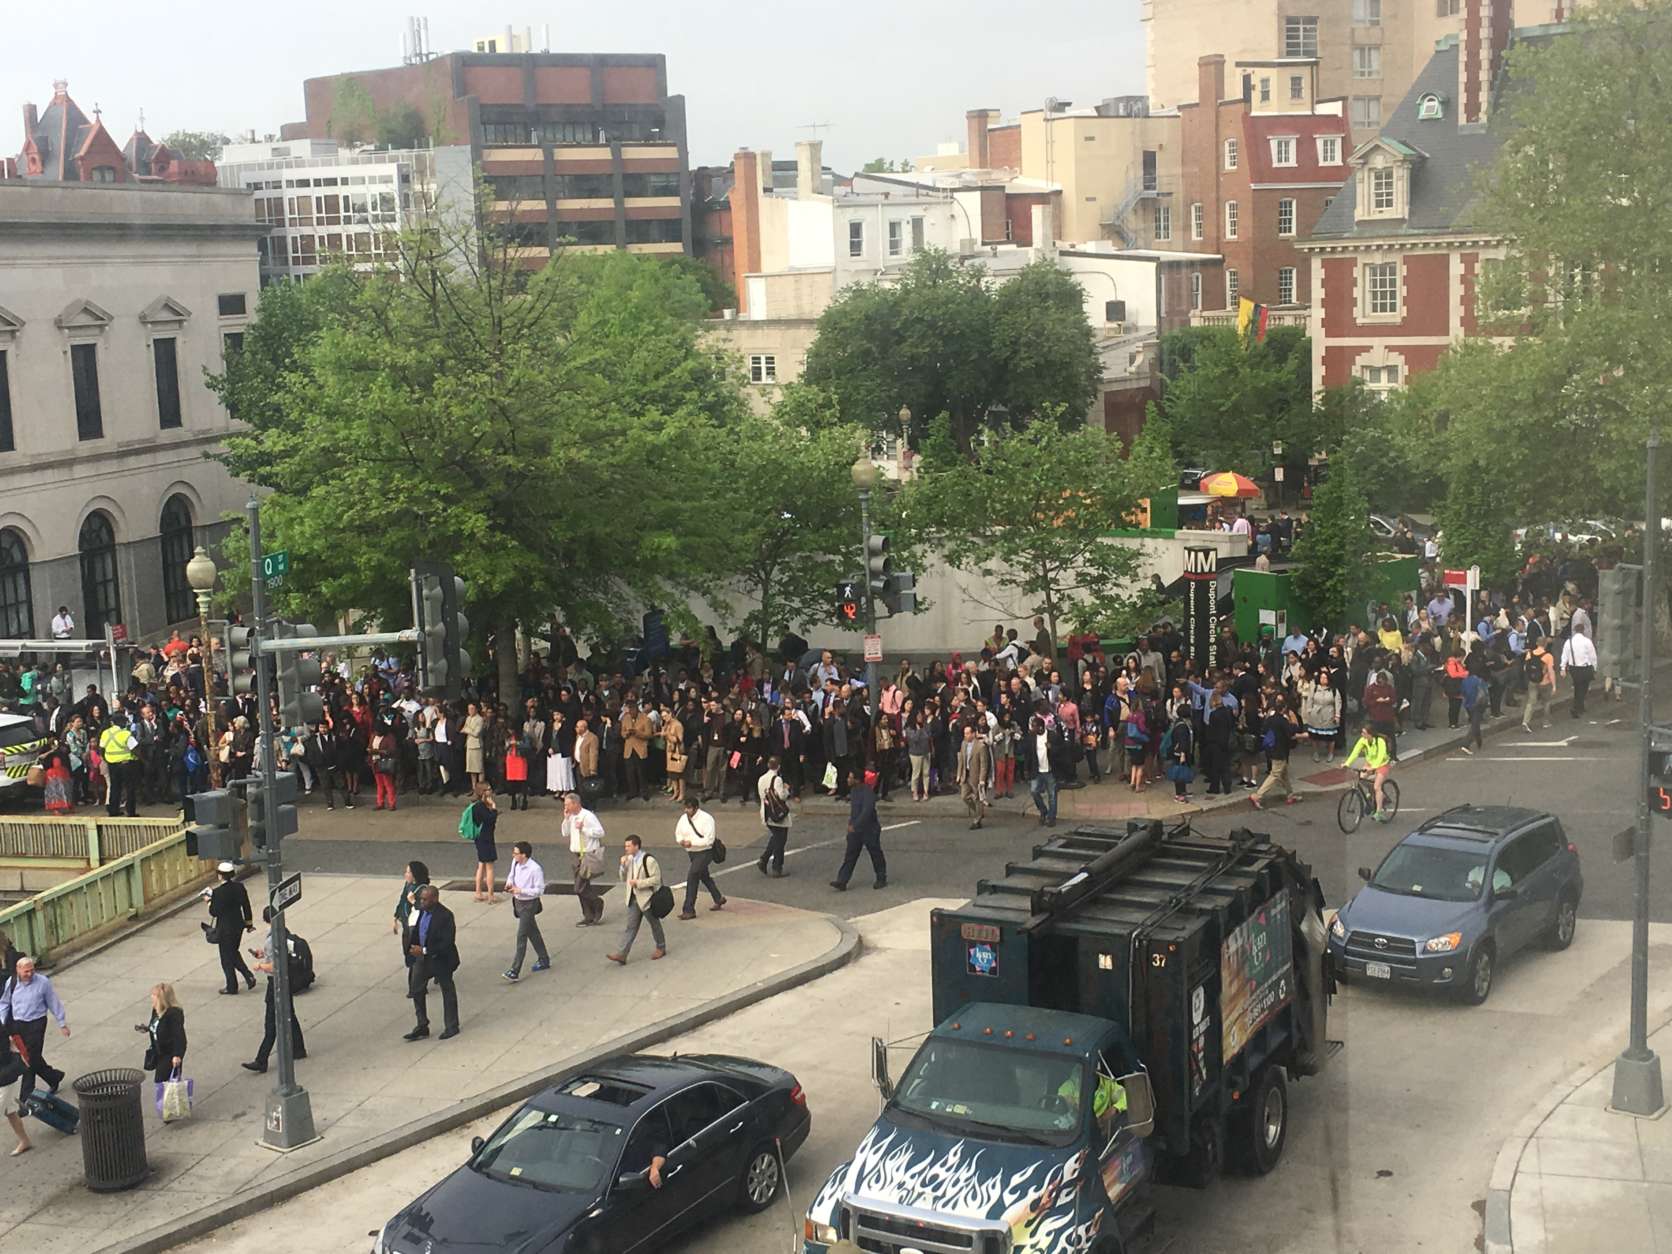 Huge morning crowds outside the Dupont Circle Metro station Thursday morning amid reports of smoke in a tunnel. (WTOP/Sarah Nania)